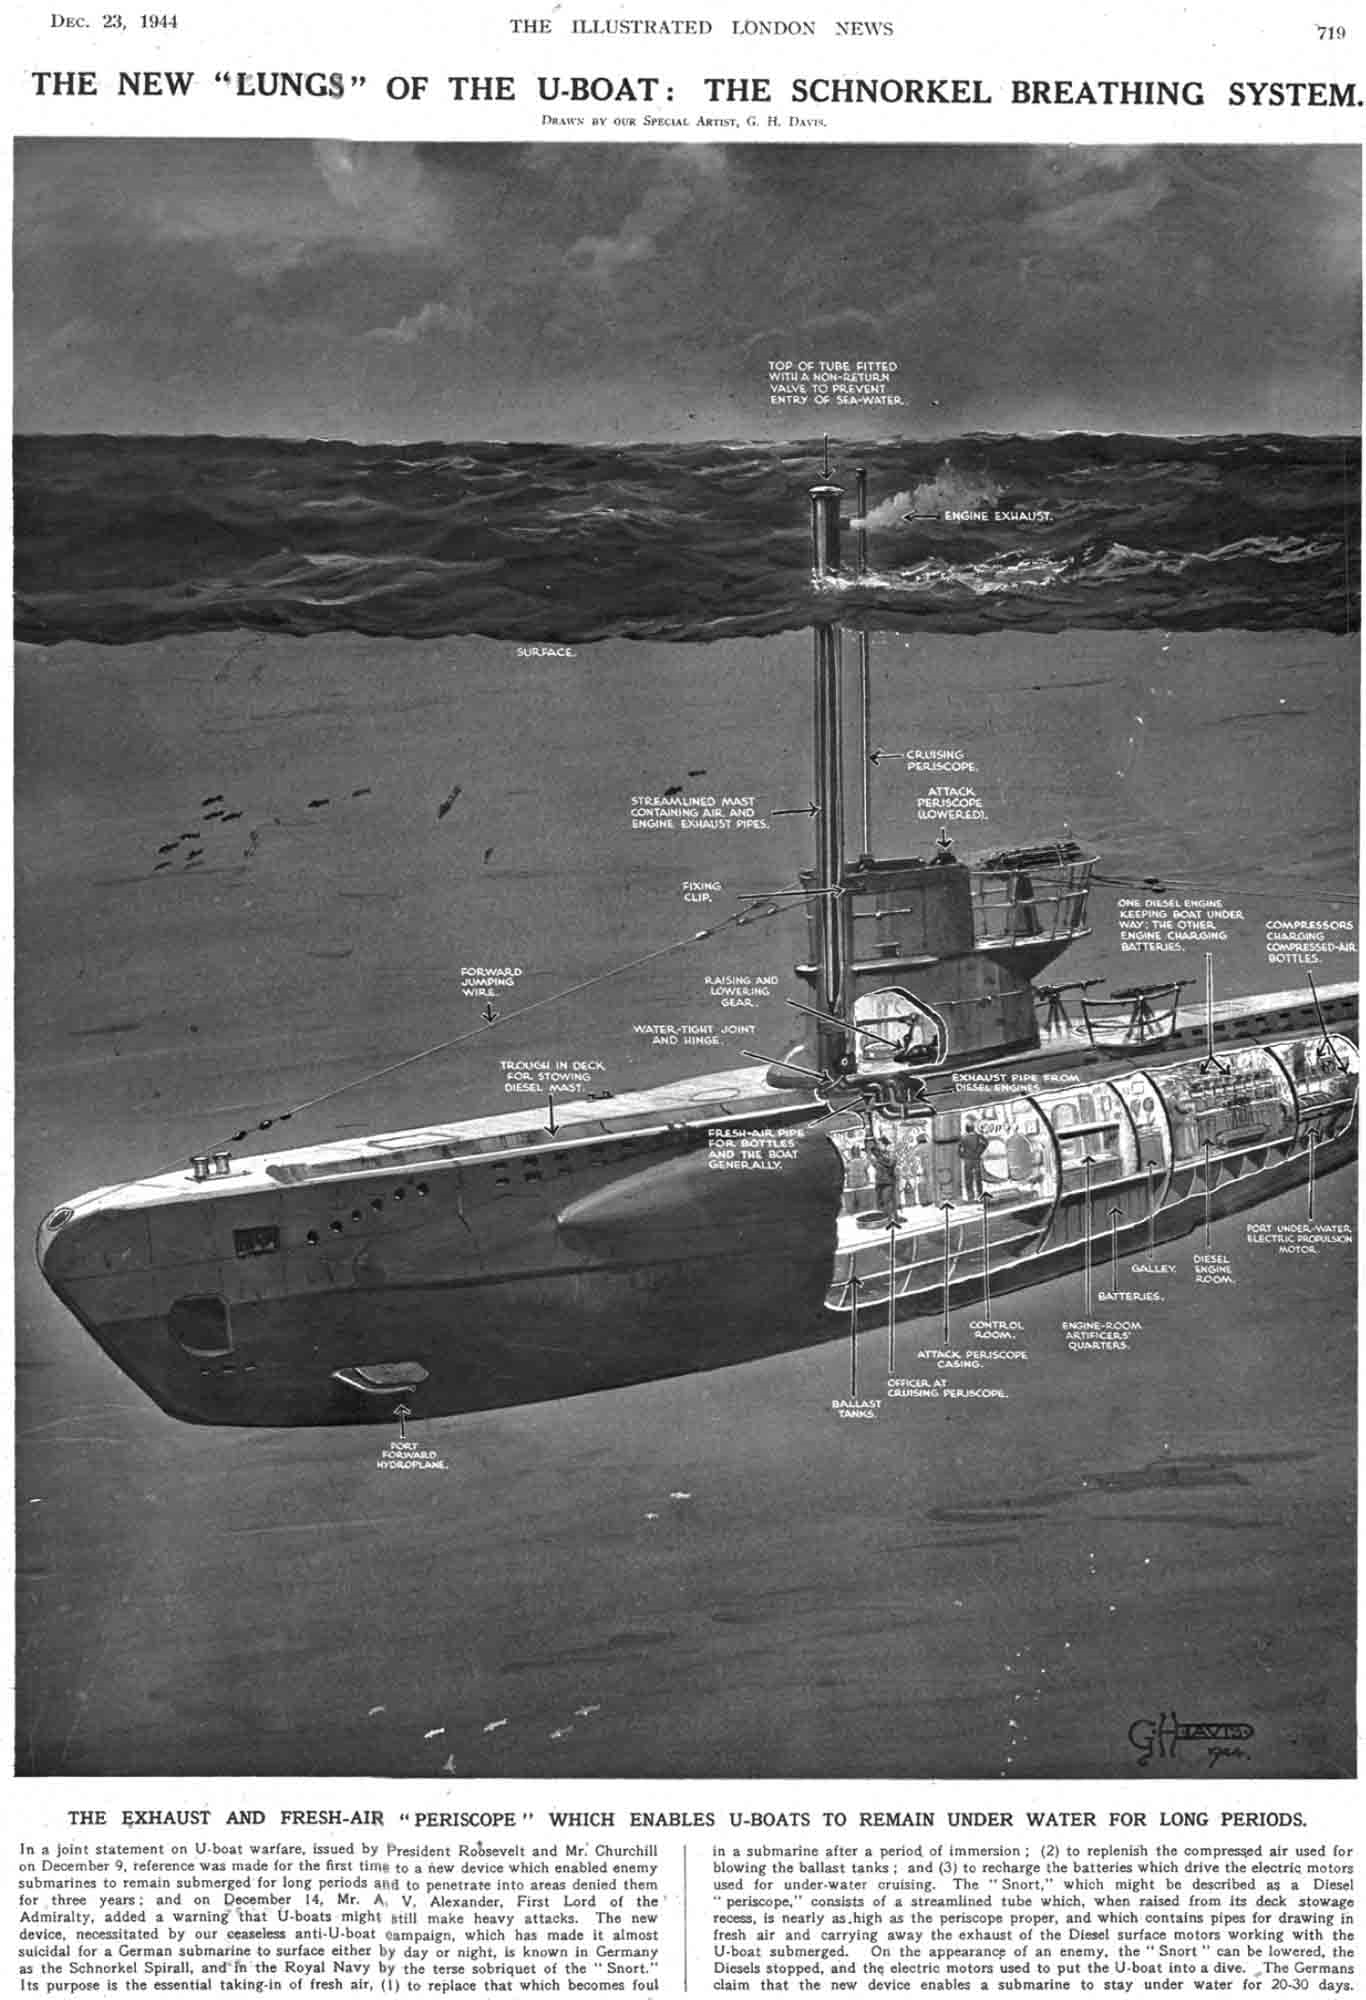 Allied Countermeasures against the snorkel equipped U boat I